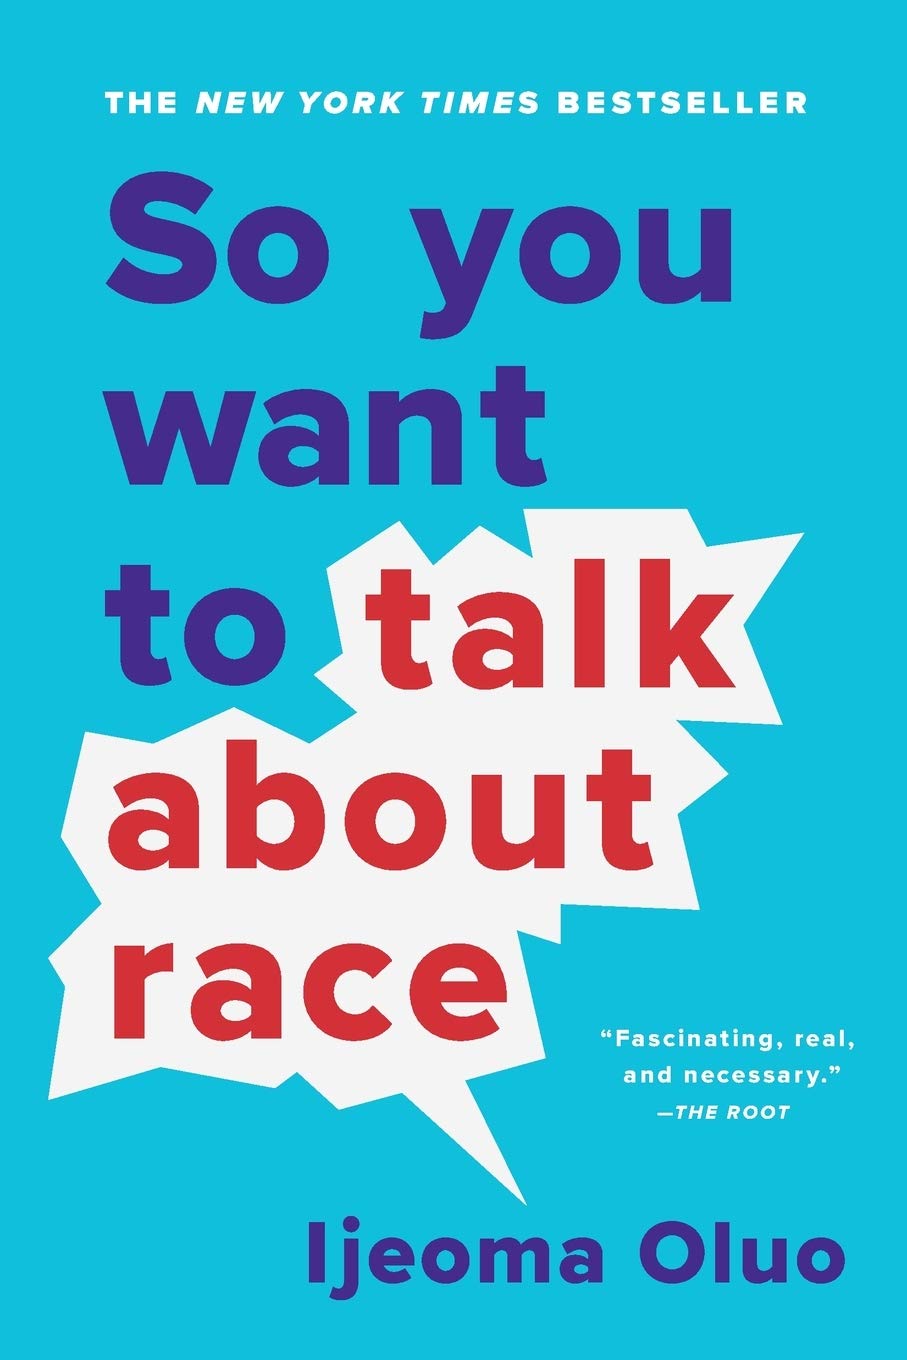 'So You Want to Talk About Race' by Ijeoma Oluo